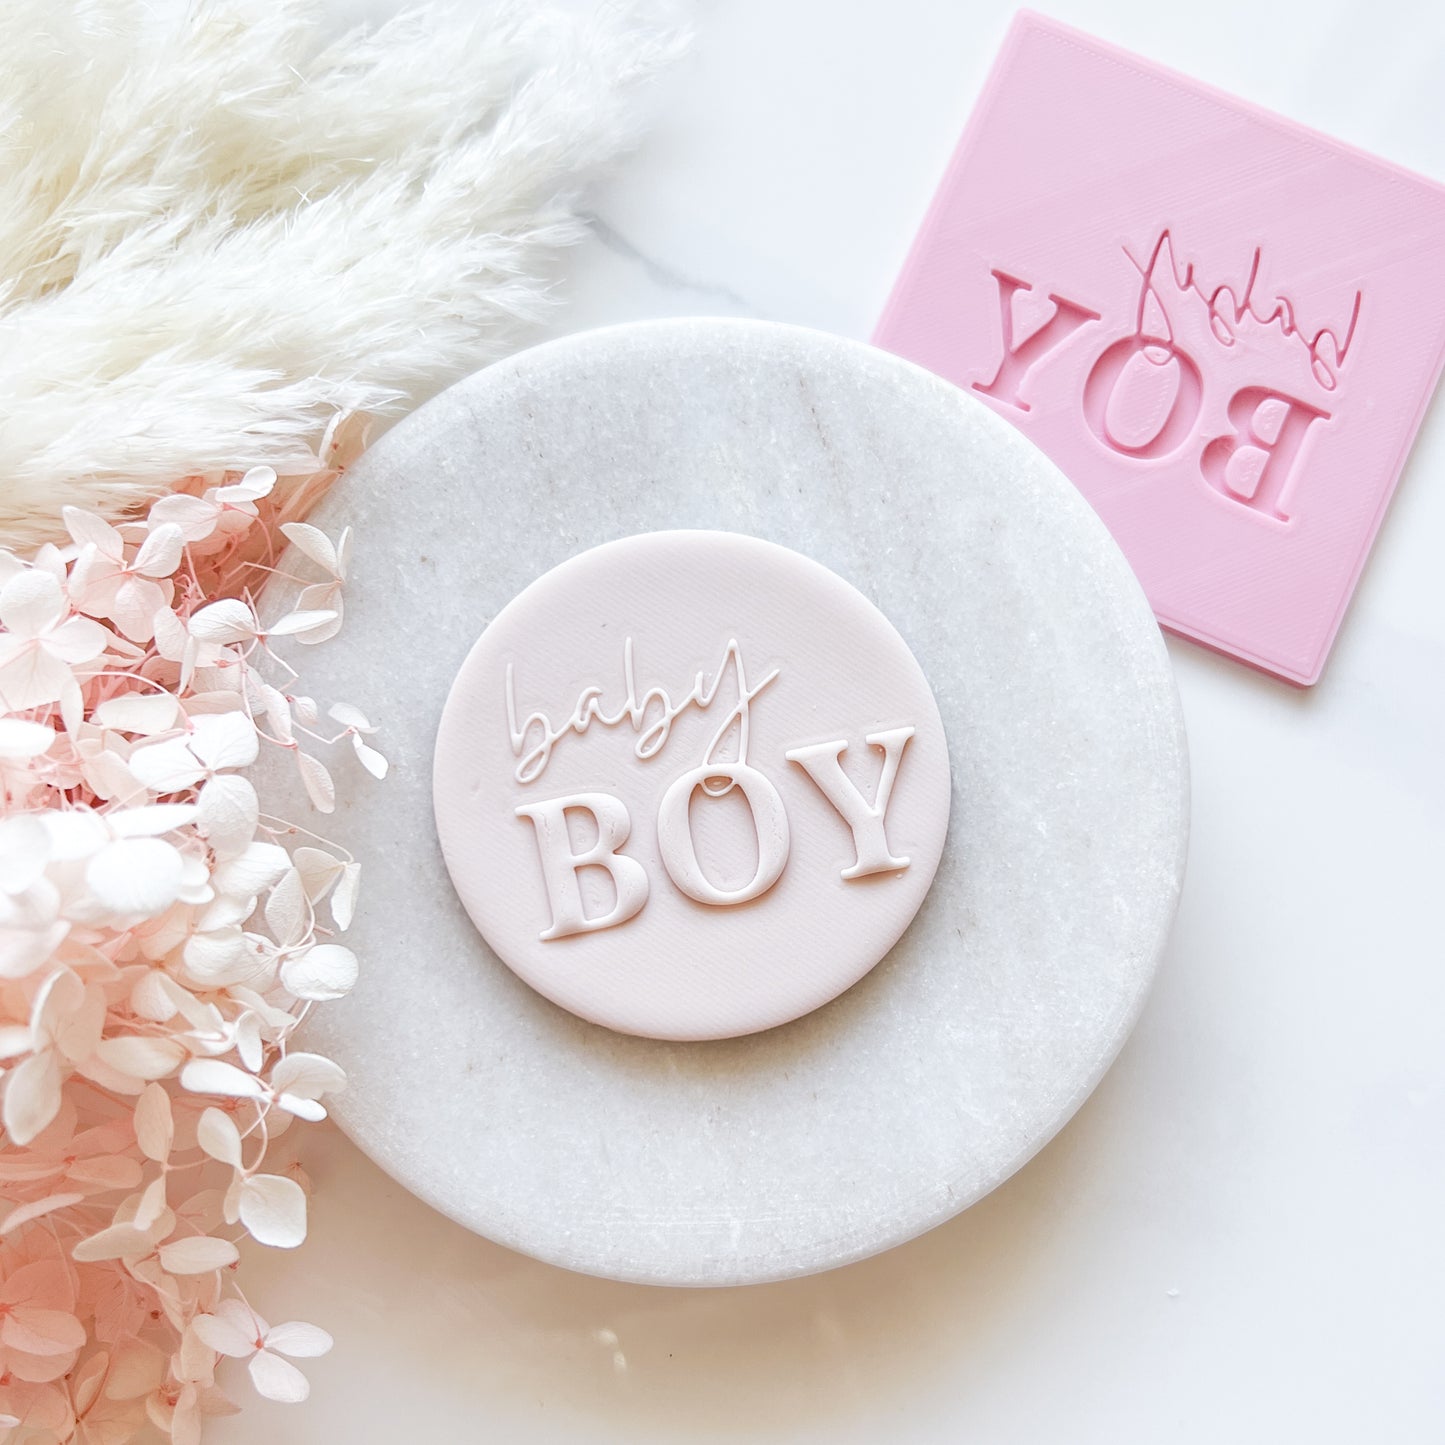 "Baby Boy" - Embossing Stamp